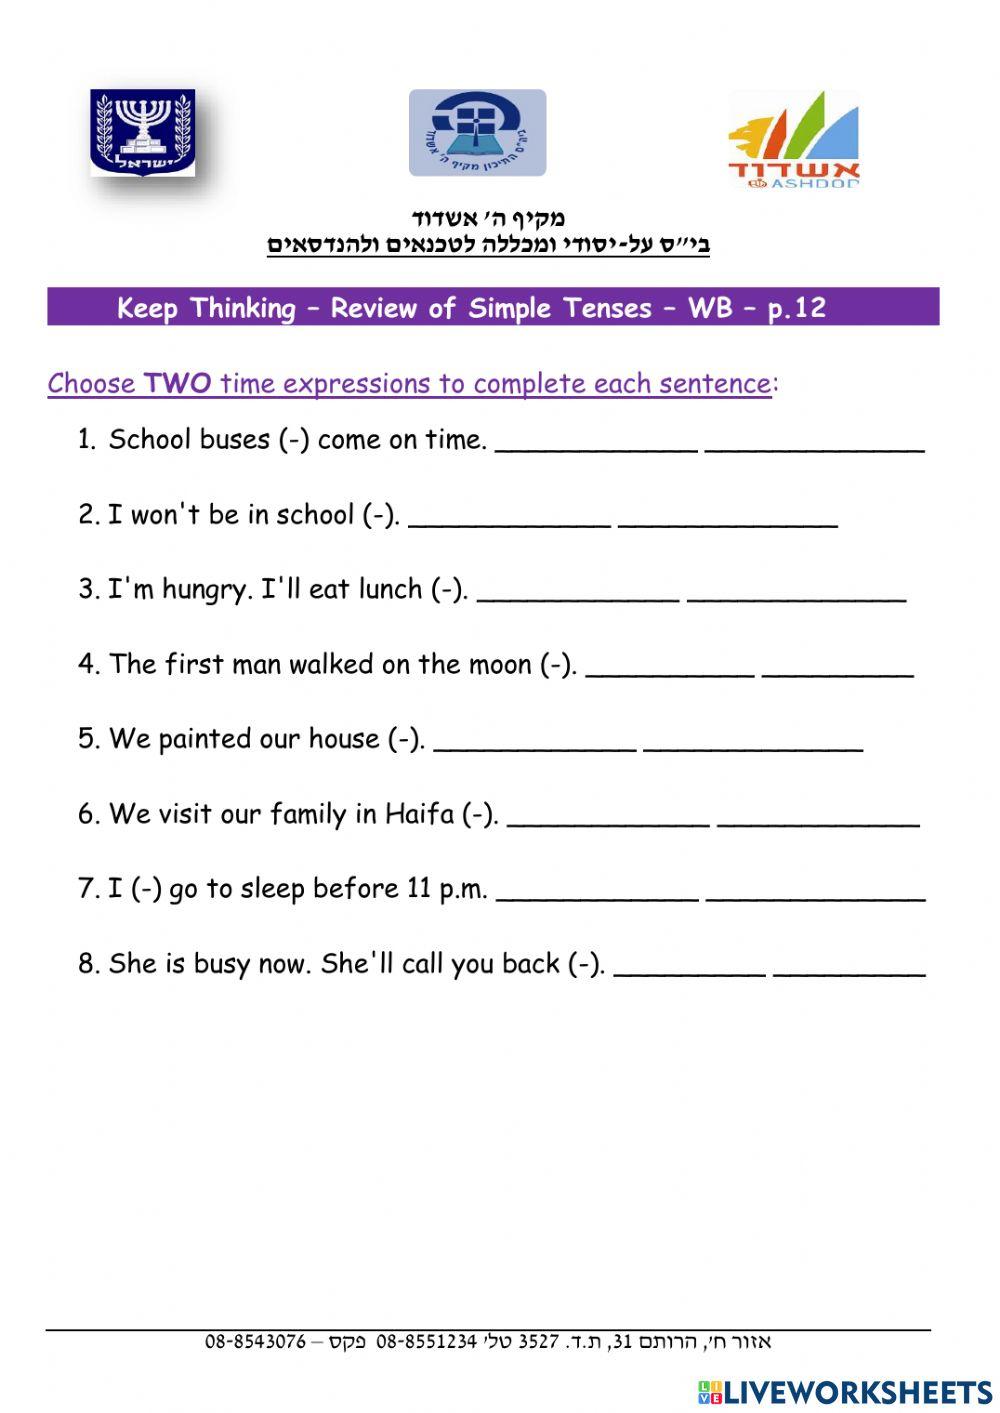 Keep Thinking - Review of Simple Tenses